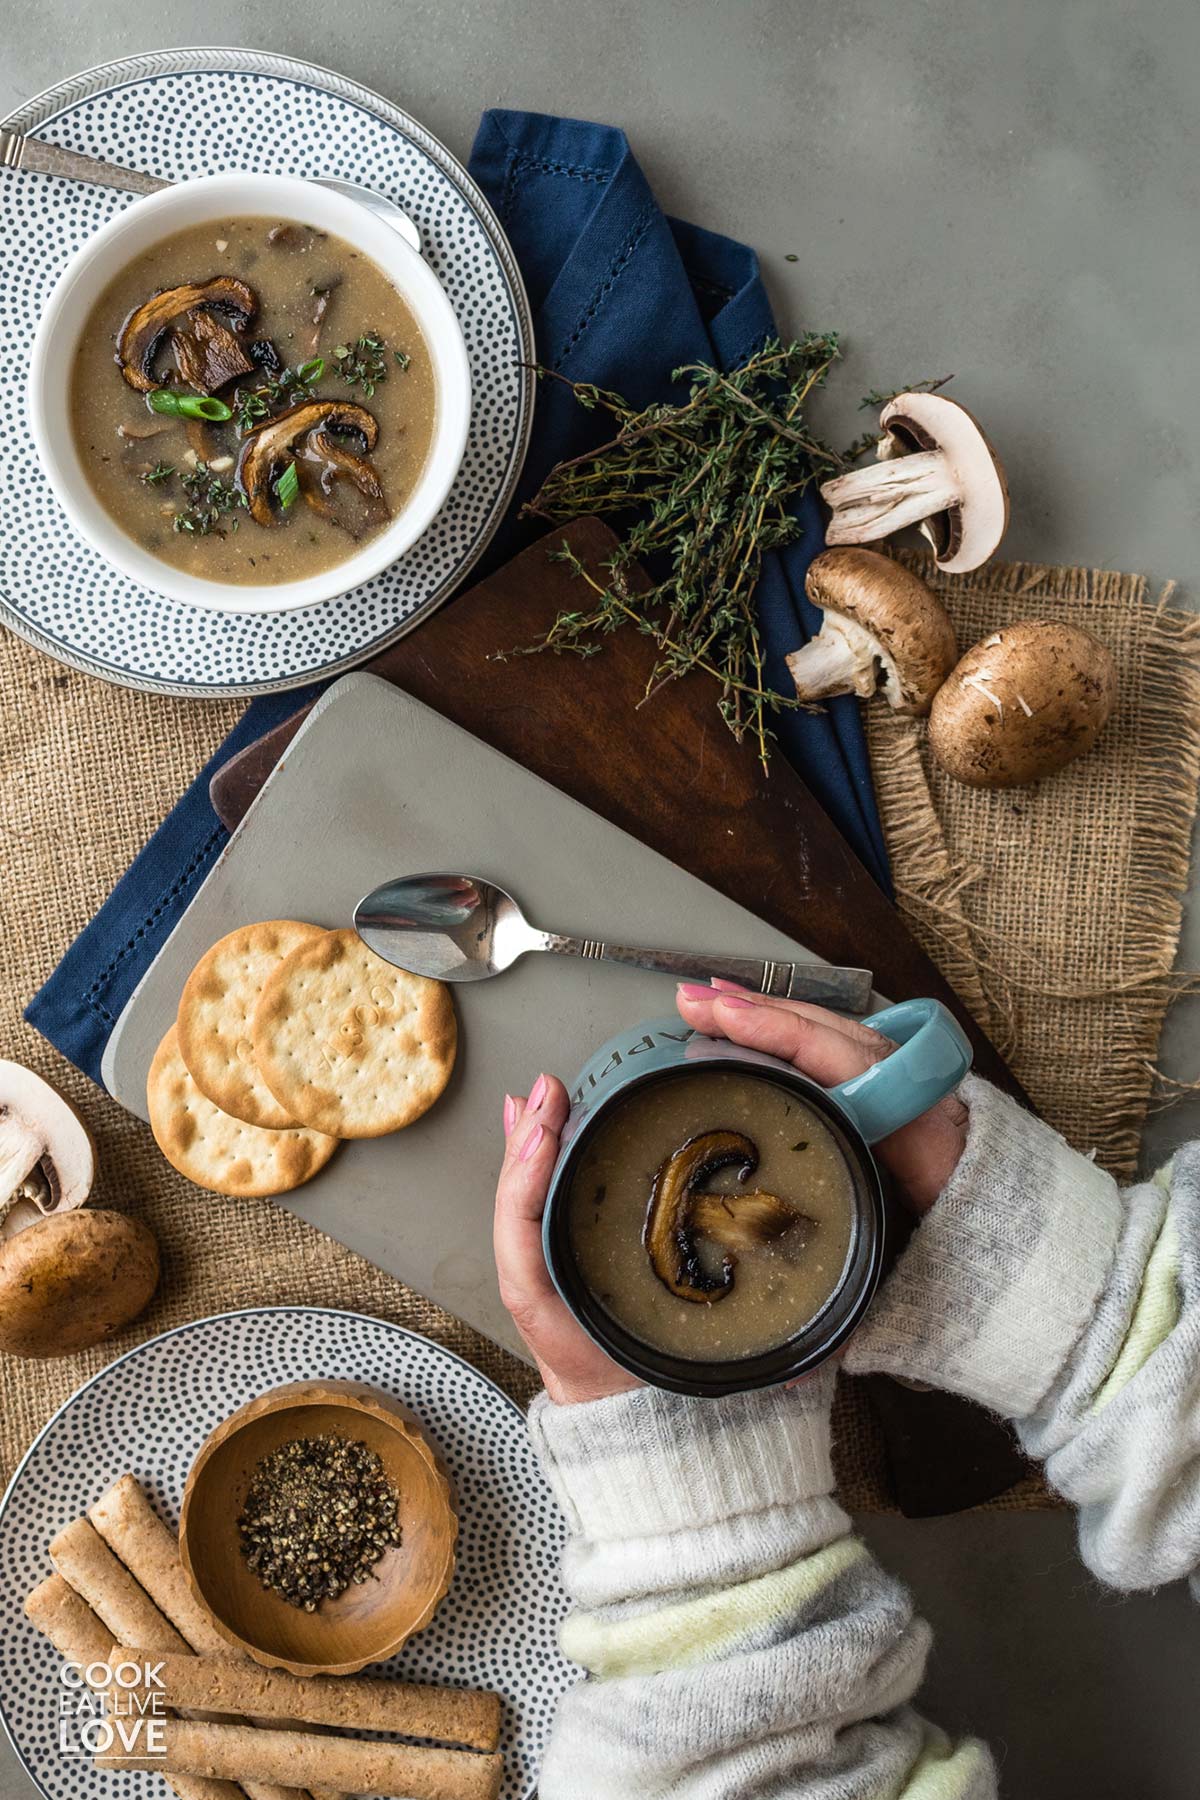 Creamy mushroom soup in wooden bowl with wooden spoon, surrounded by green onions and whole mushrooms.